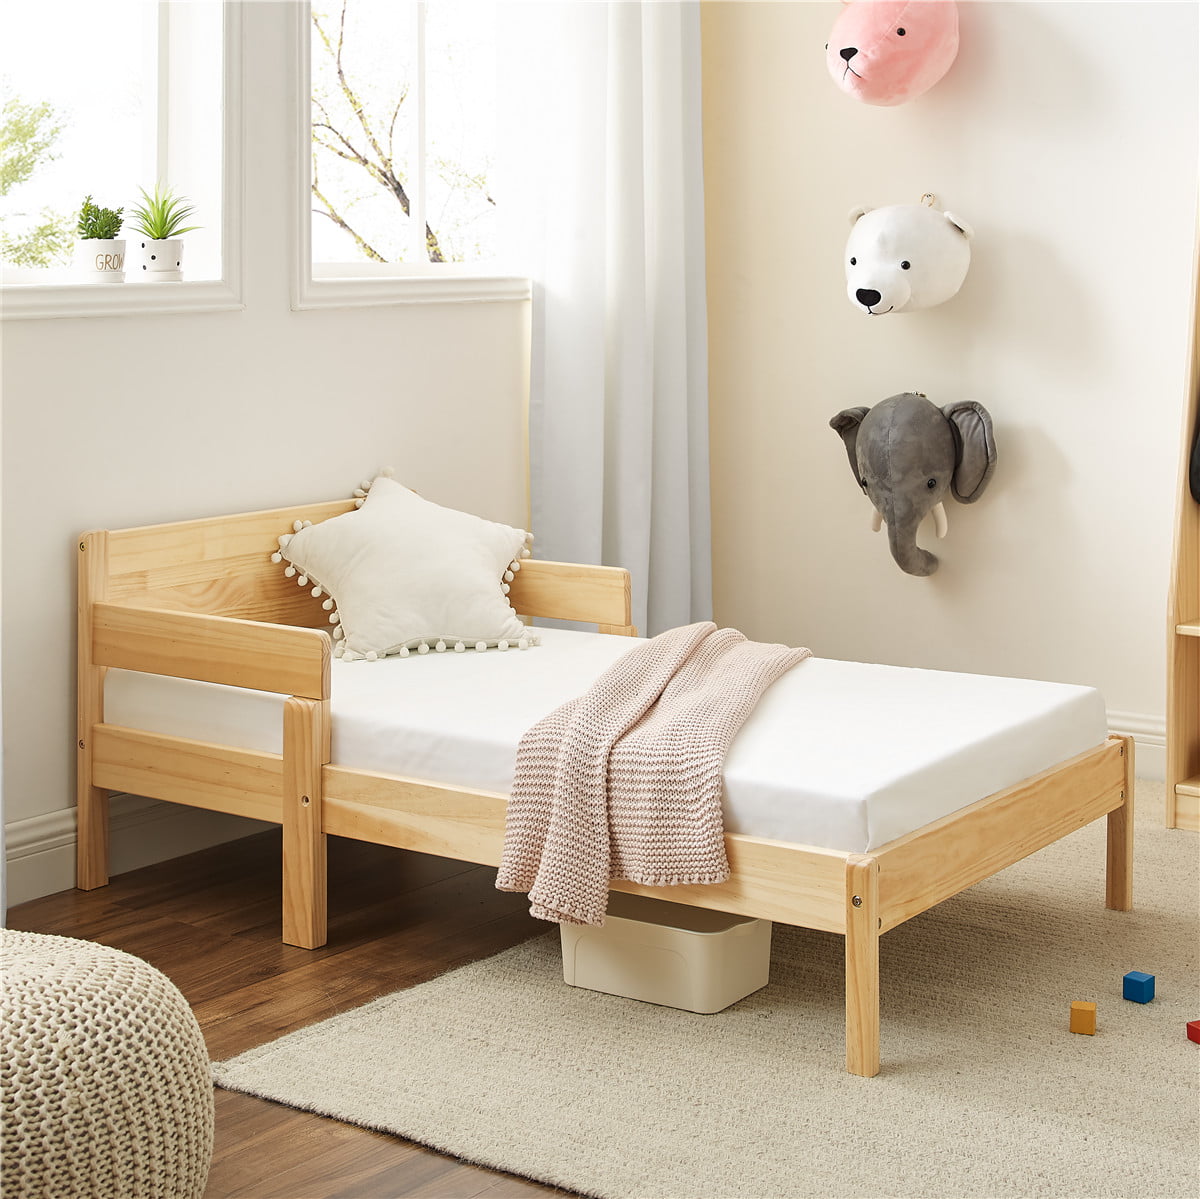 MUSEHOMEINC 2 in 1 Convertible Toddler Bed,Multifunctional Solid Wood Kids Bed w/ 2 Side Guardrails Fits Standard Crib Mattress, Children Bed Frame Convert to one Chair/Sofa Mattress not Included 